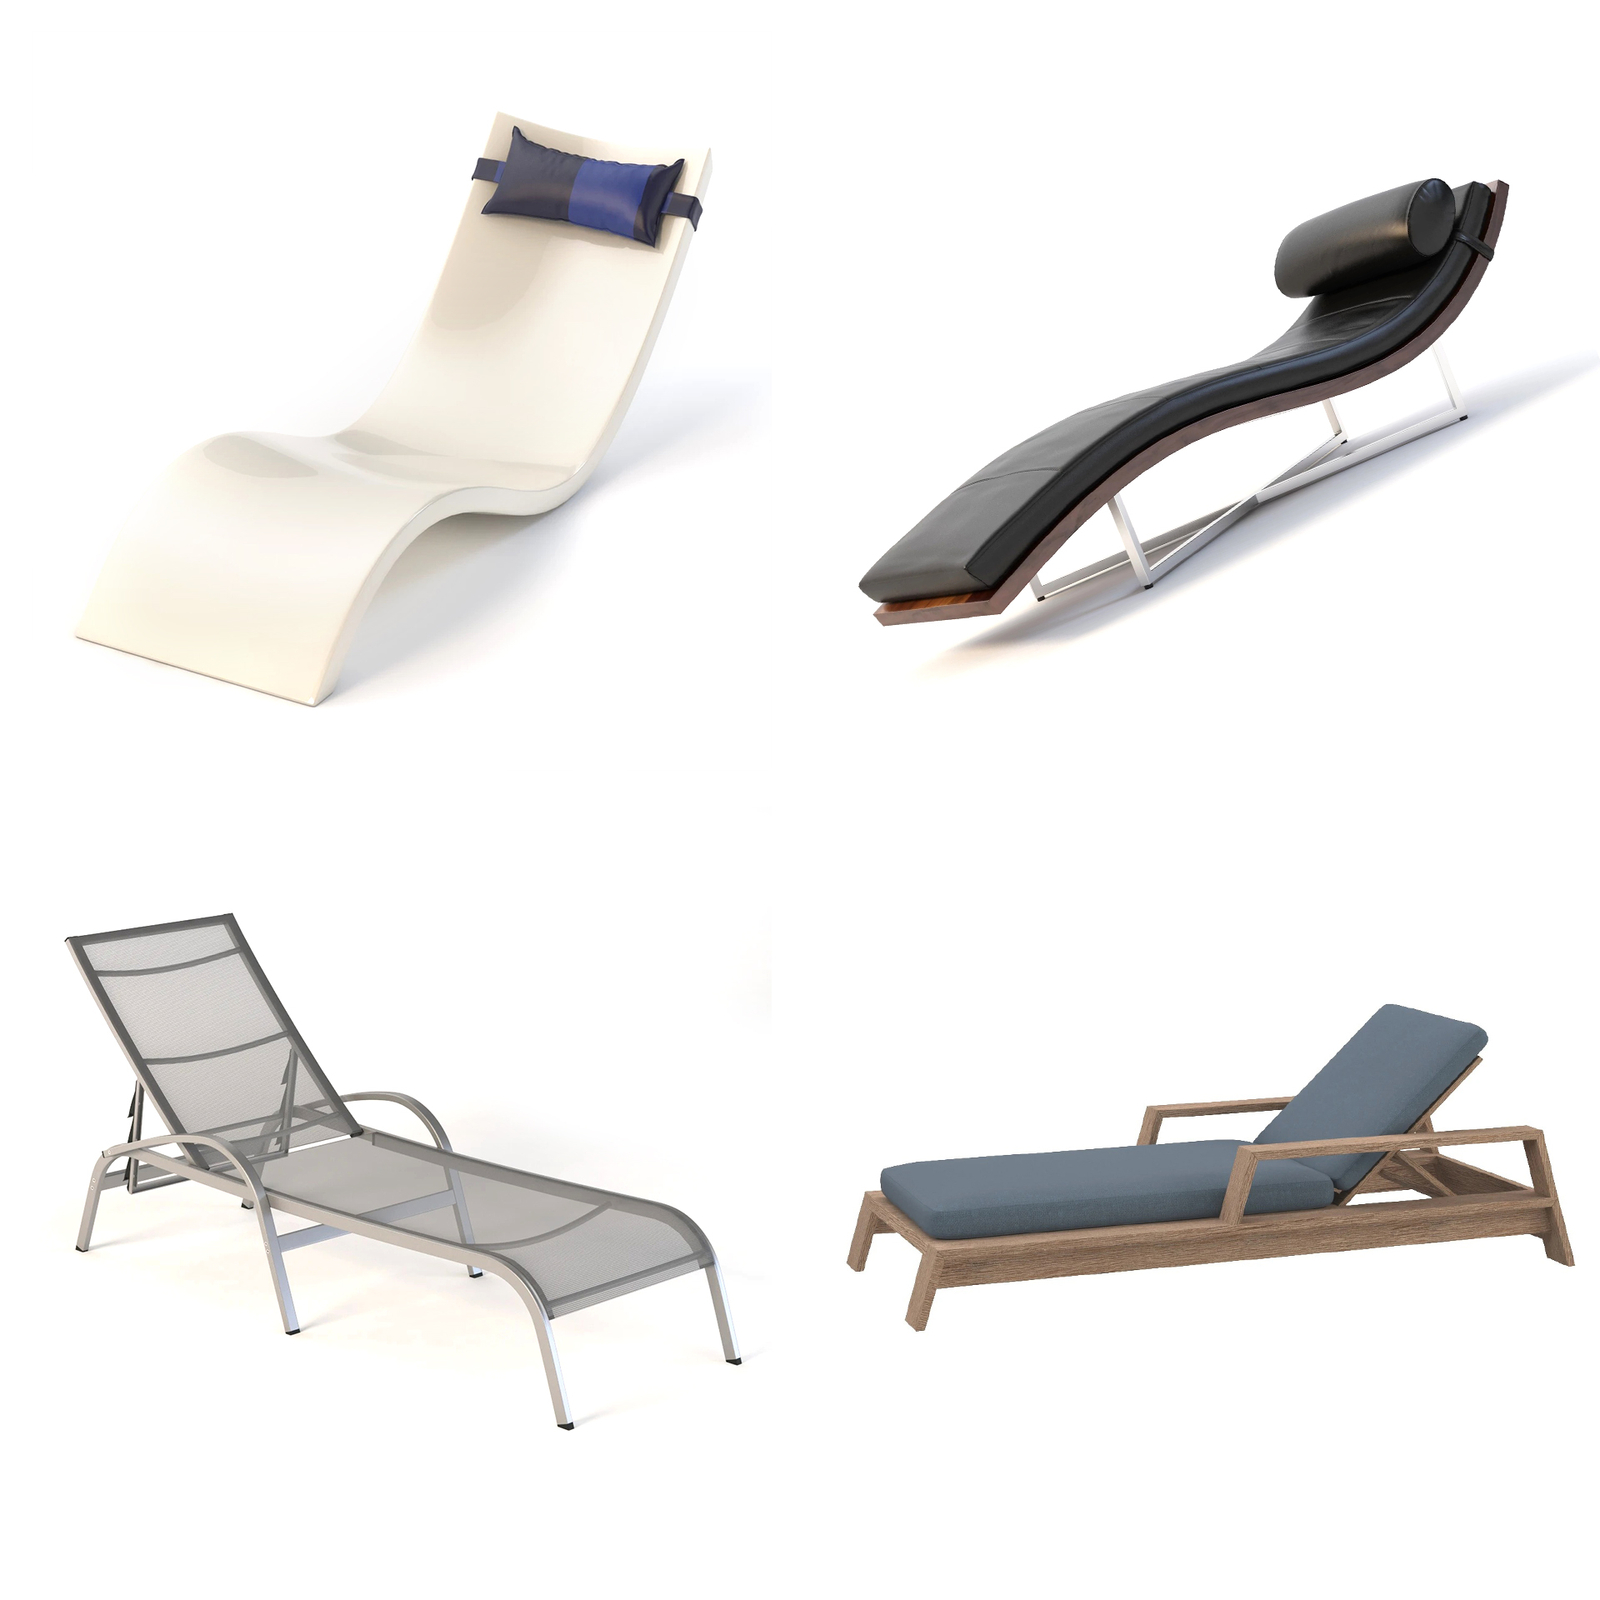 Collection of Four Modern Sun Lounger 3D Day Bed Models 3D Model_06